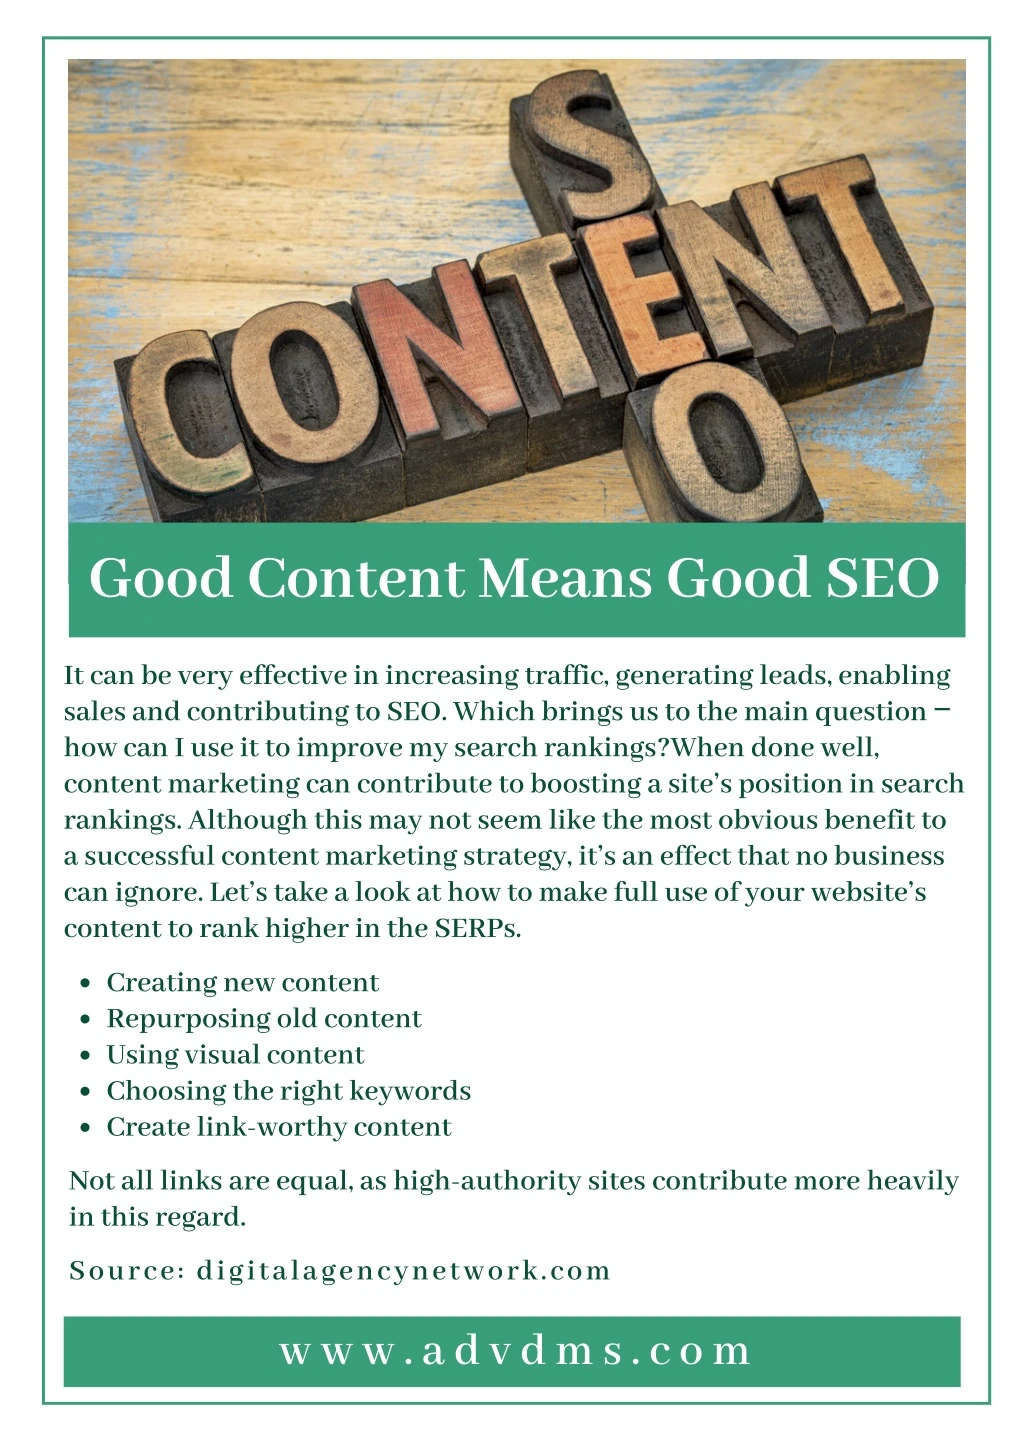 good content means good seo